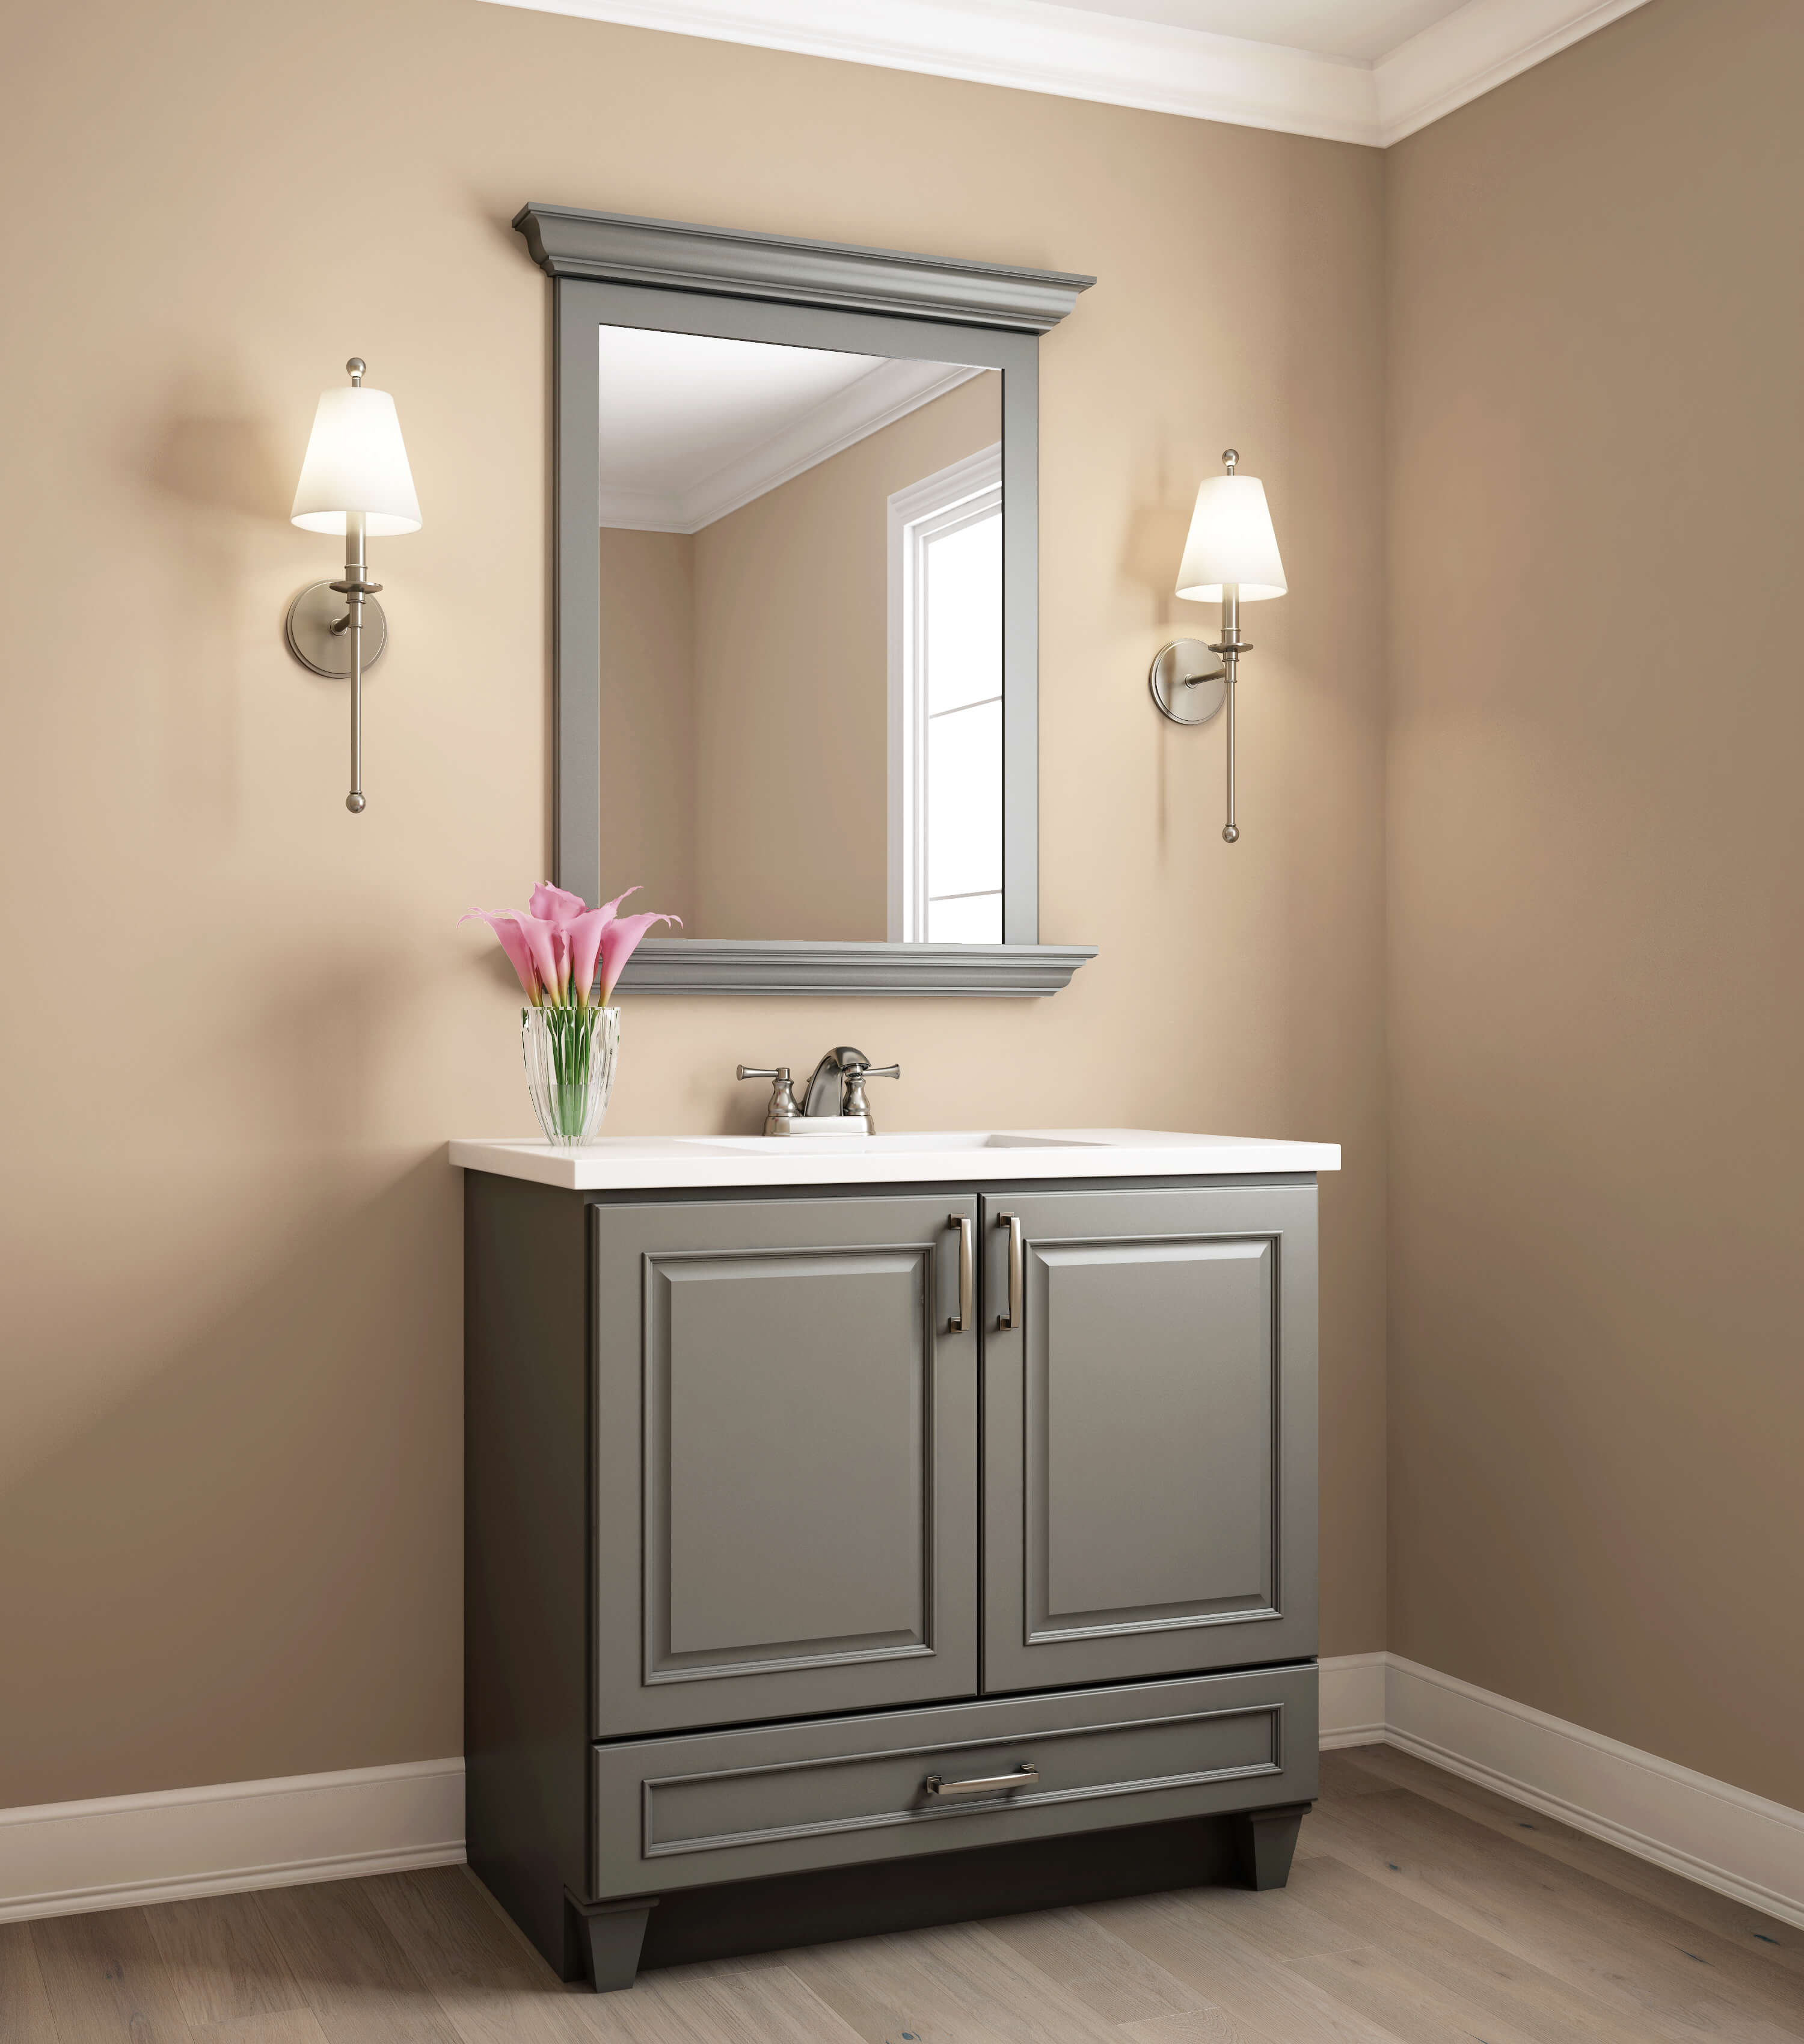 A small bathroom vanity and mirror with a gray-green painted finish with beige walls.